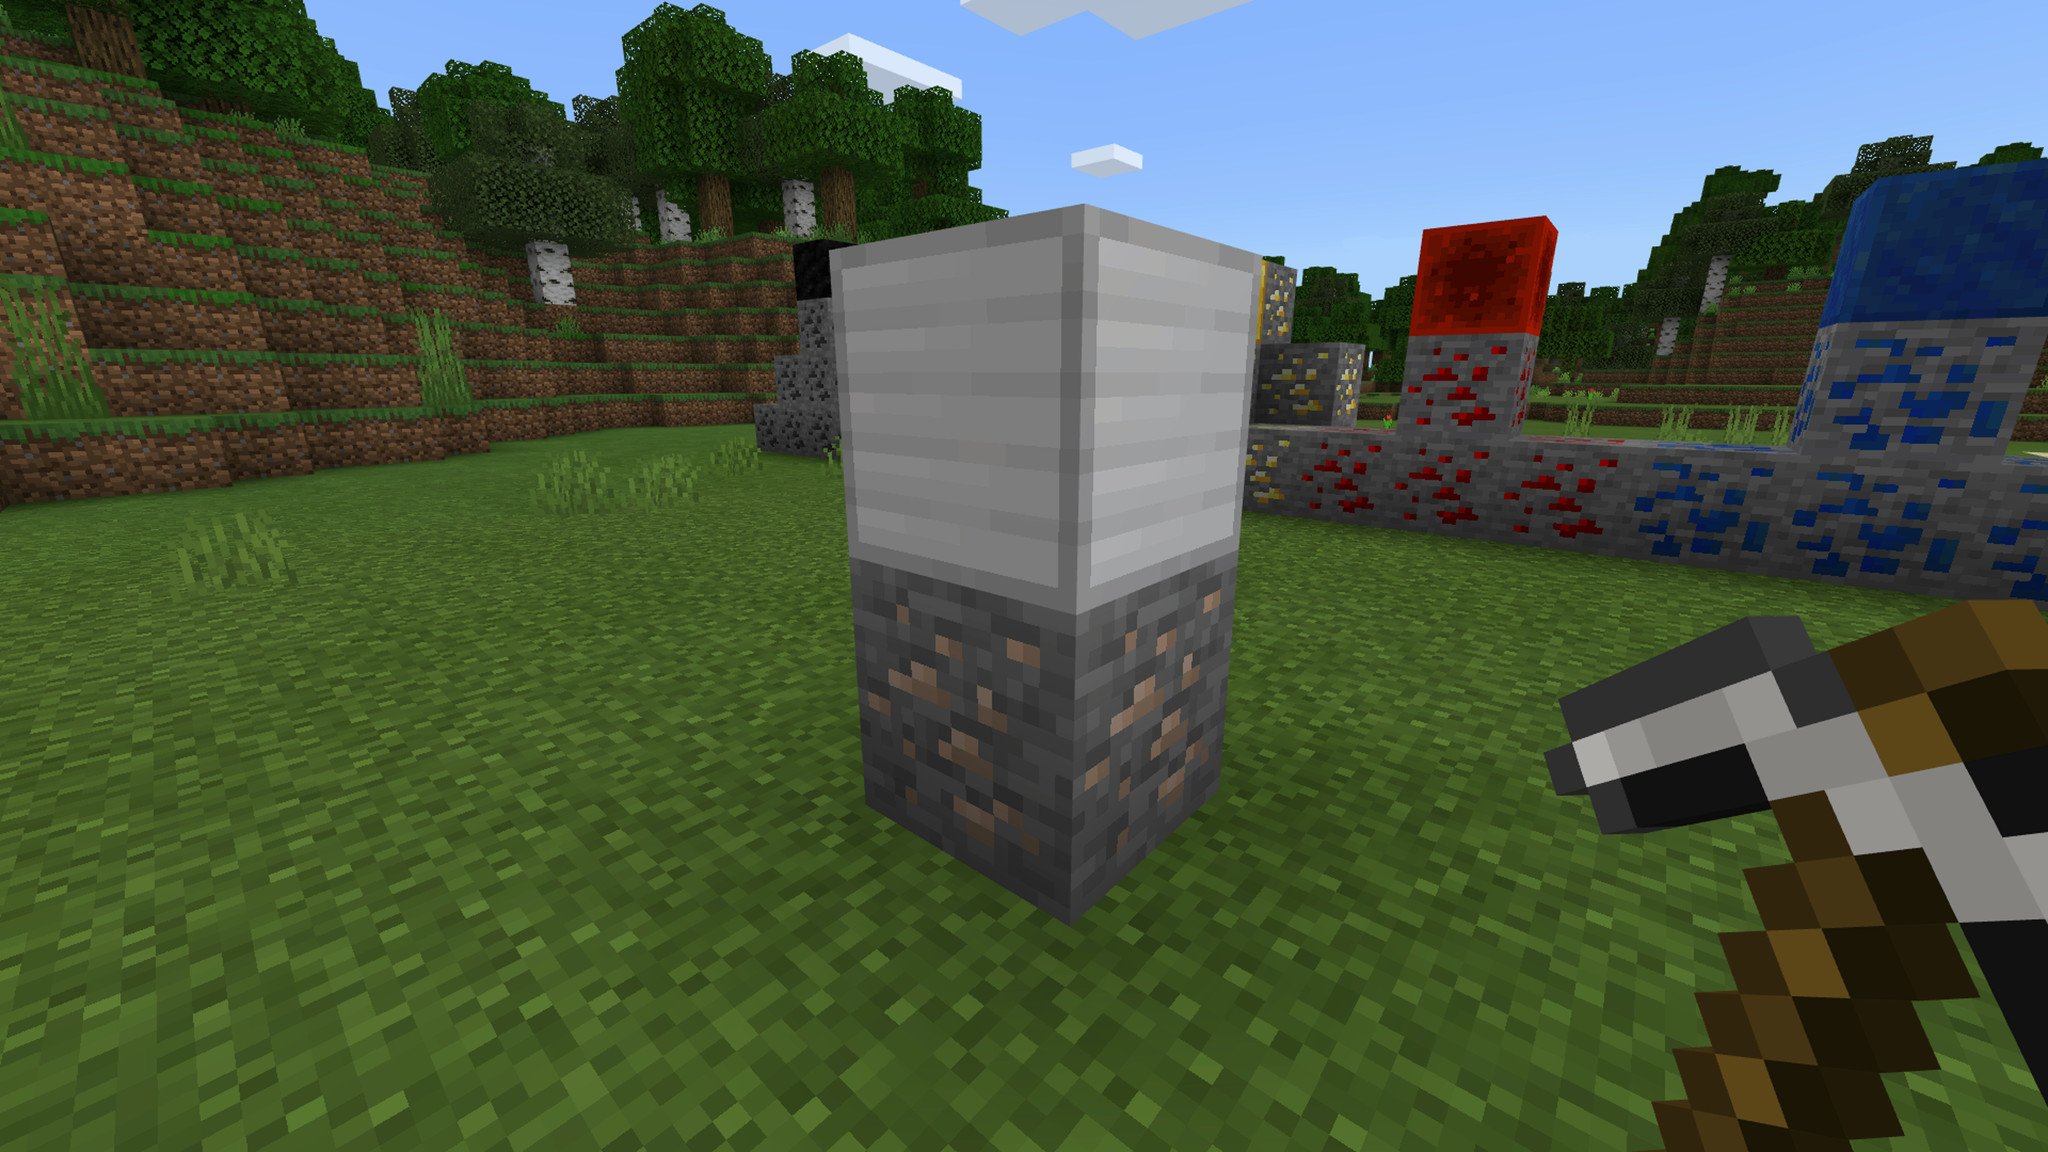 Some iron ore and an iron block